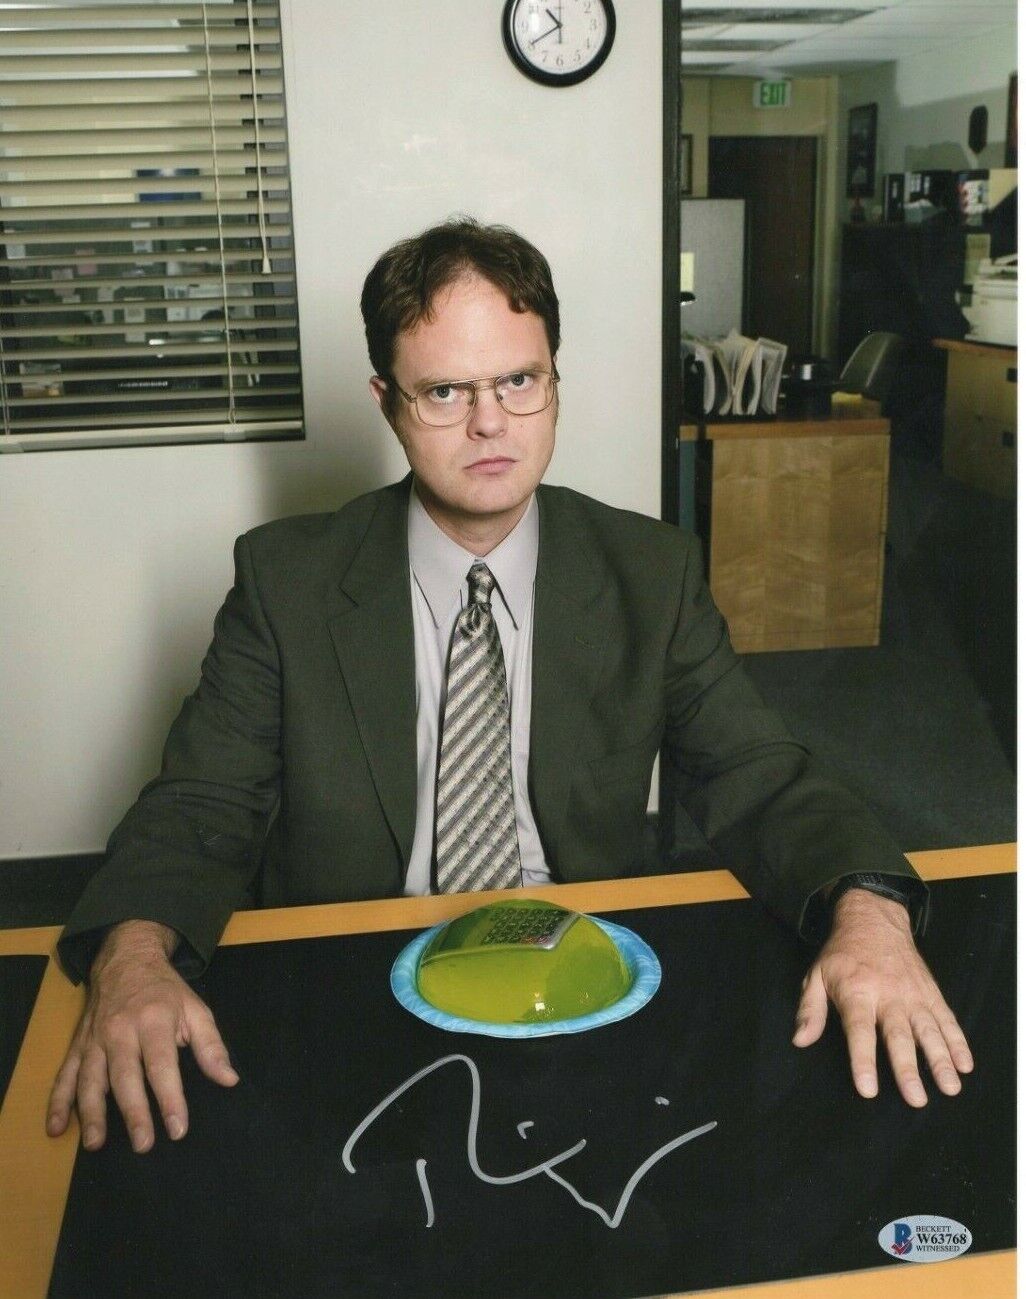 RAINN WILSON DWIGHT SCHRUTE SIGNED ! Super beauty product restock quality top! PHOTO OFFICE Discount mail order 11X14 AUTOGR THE